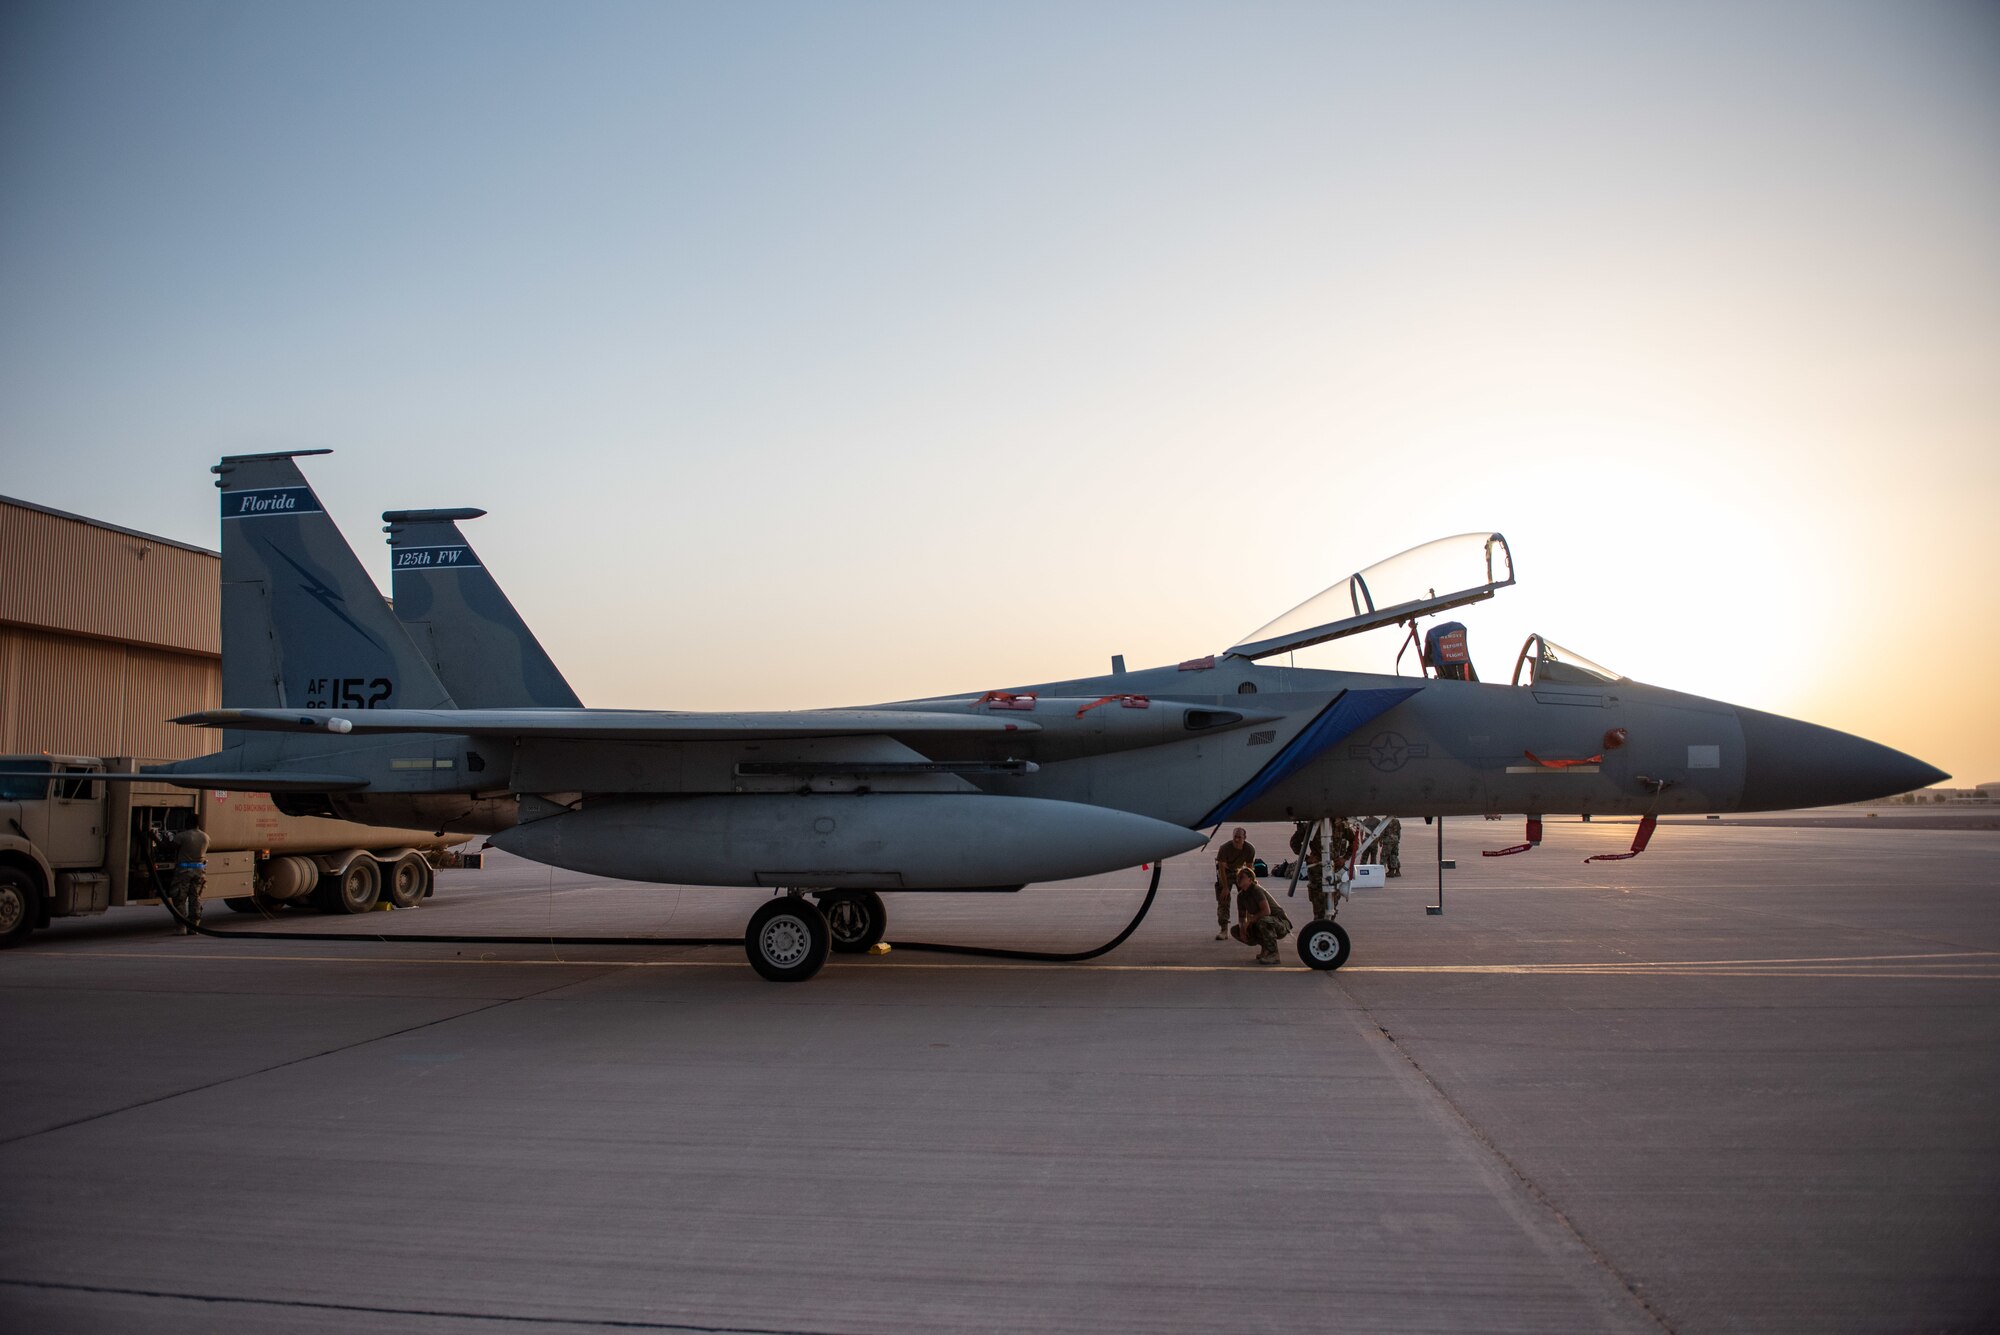 An F-15C Eagle receives fuel during Exercise Hype Eagle Aug. 18, 2019, at Prince Sultan Air Base, Saudi Arabia. The 159th Expeditionary Fighter Squadron forward deployed to challenge their flexibility at expanding tactical and strategic reach while strengthening coalition and regional partnerships in the U.S. Central Command area of responsibility. (U.S. Air Force photo by Staff Sgt. Chris Thornbury)